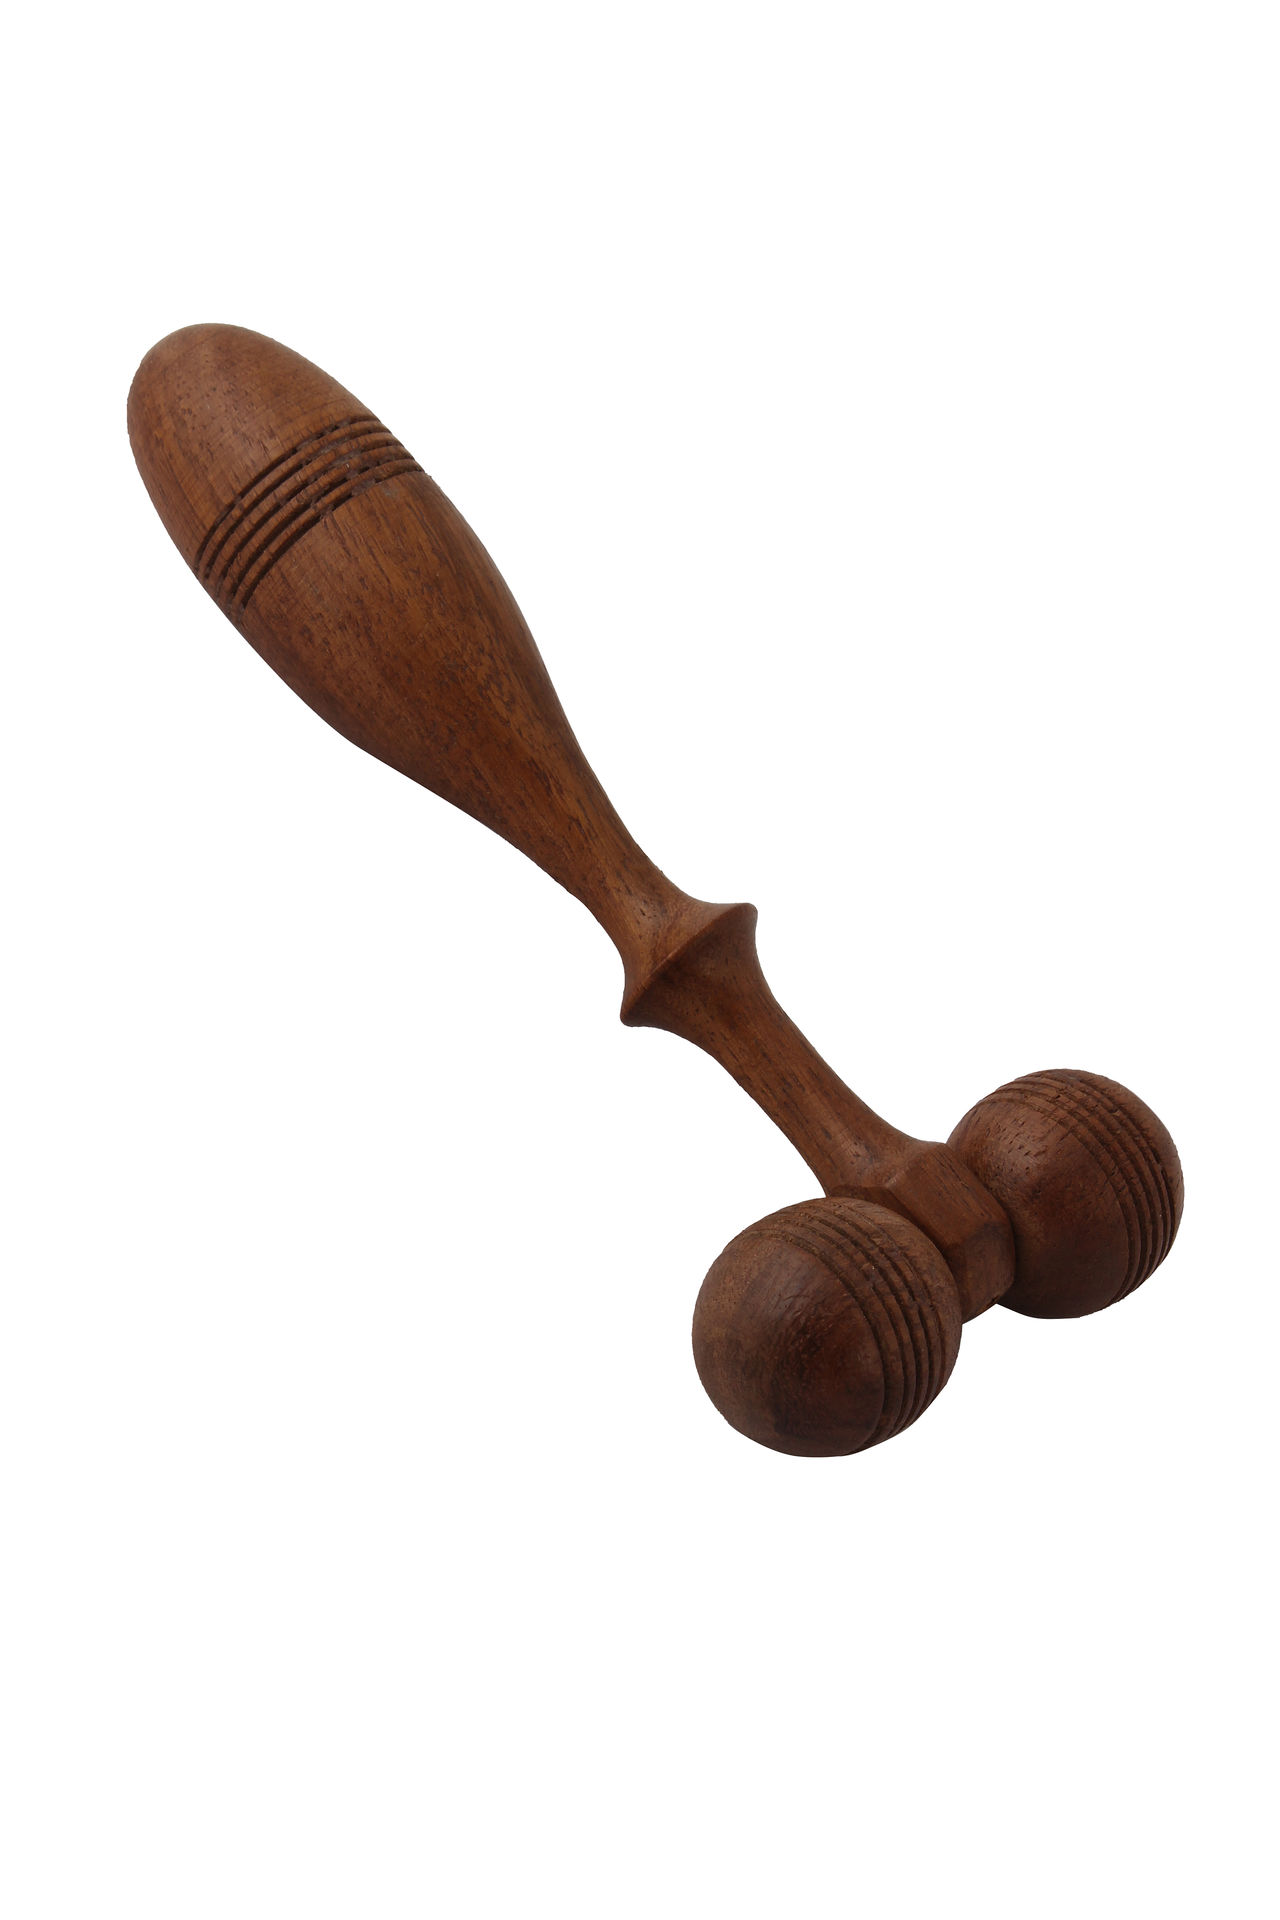 Buy Craft Art India Brown Wooden Hand Massager For Body Stress Acupressure Arm Care Cai Hd 0040